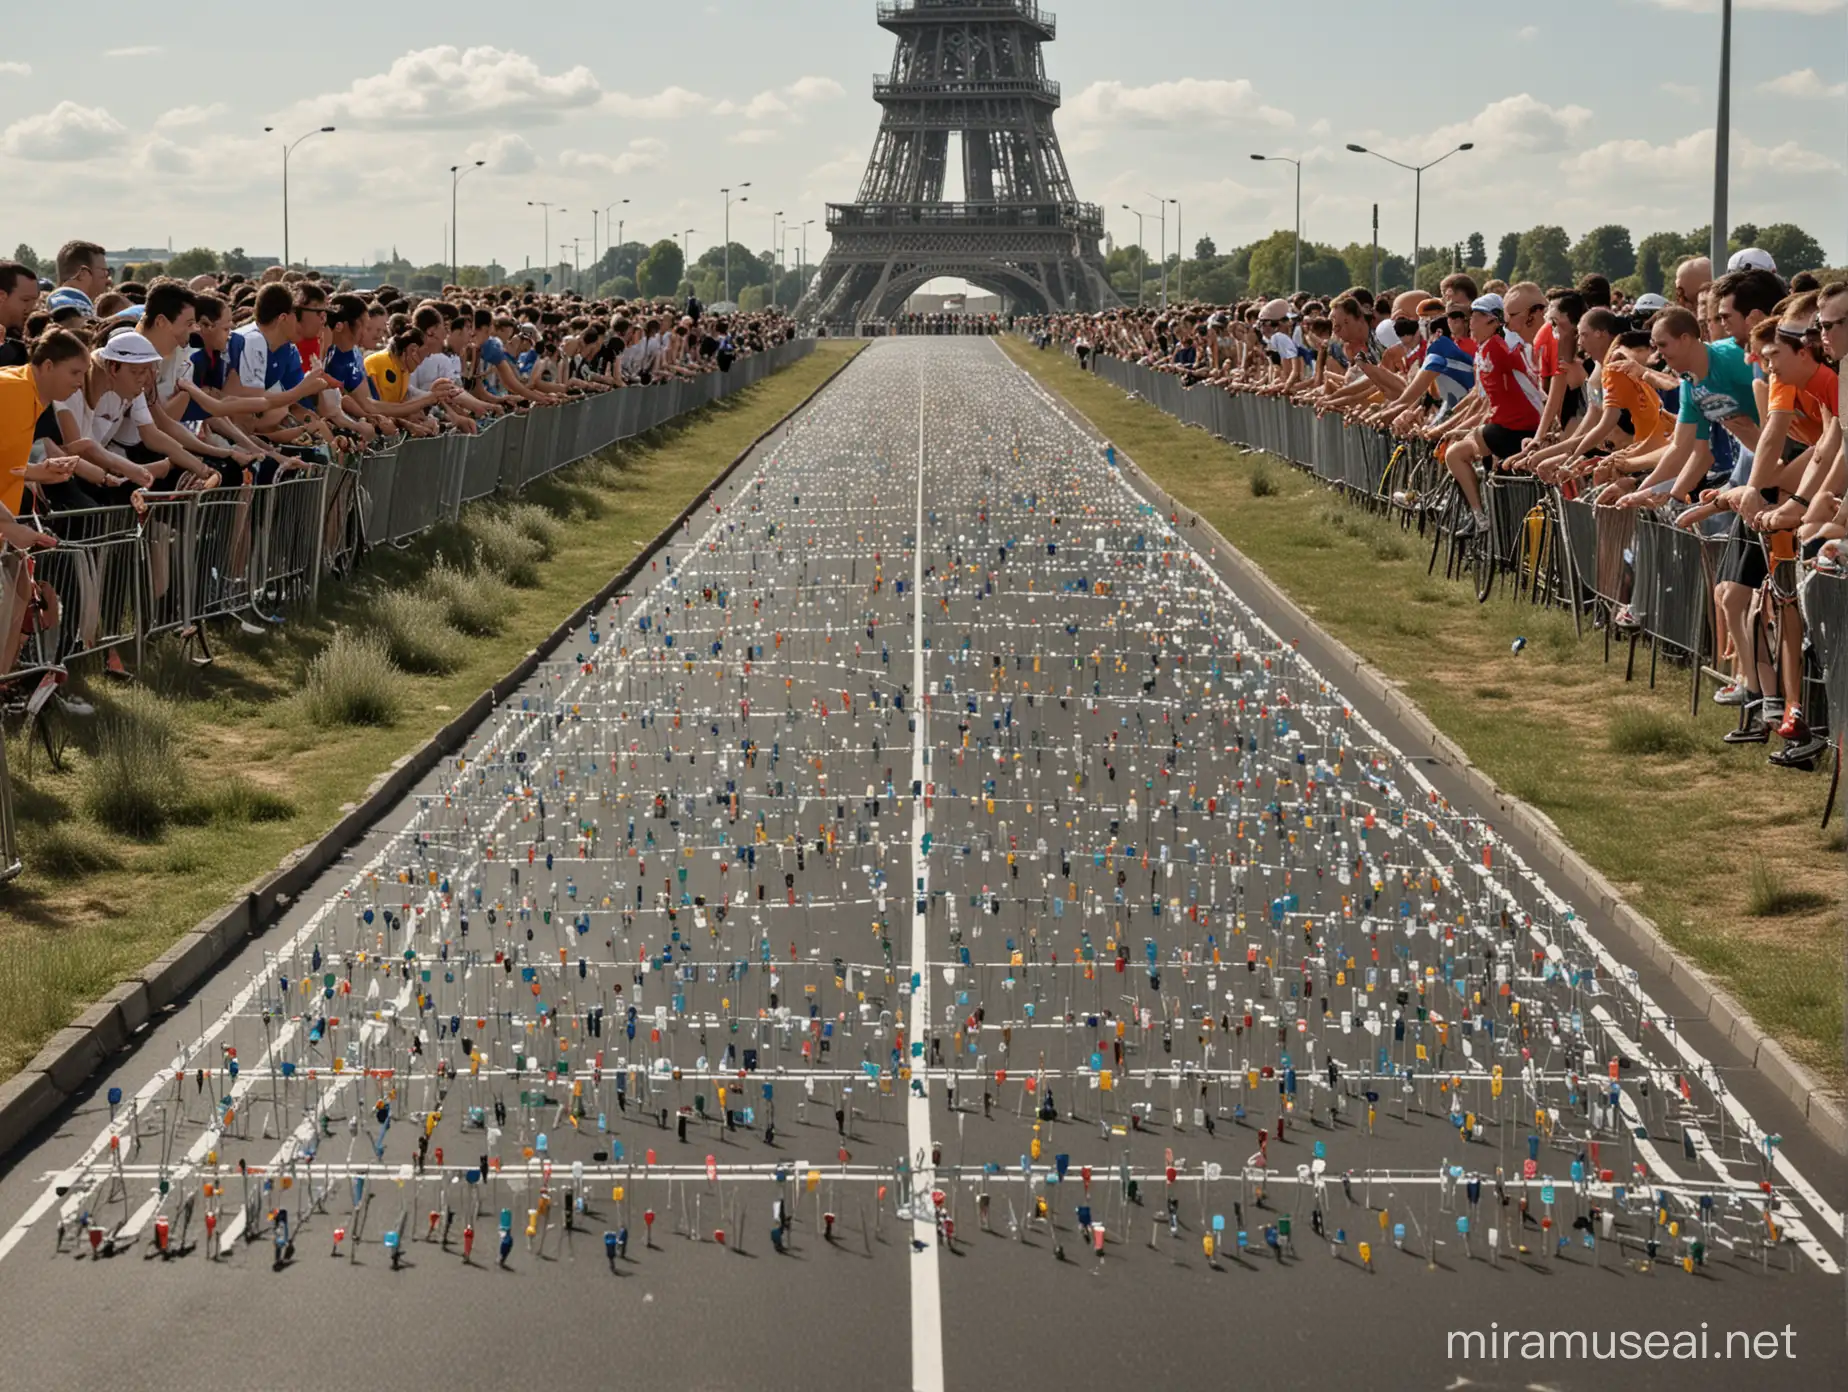 A world-class cycle road race. In the distance stands a giant tower of safety pins. The players are running towards it.